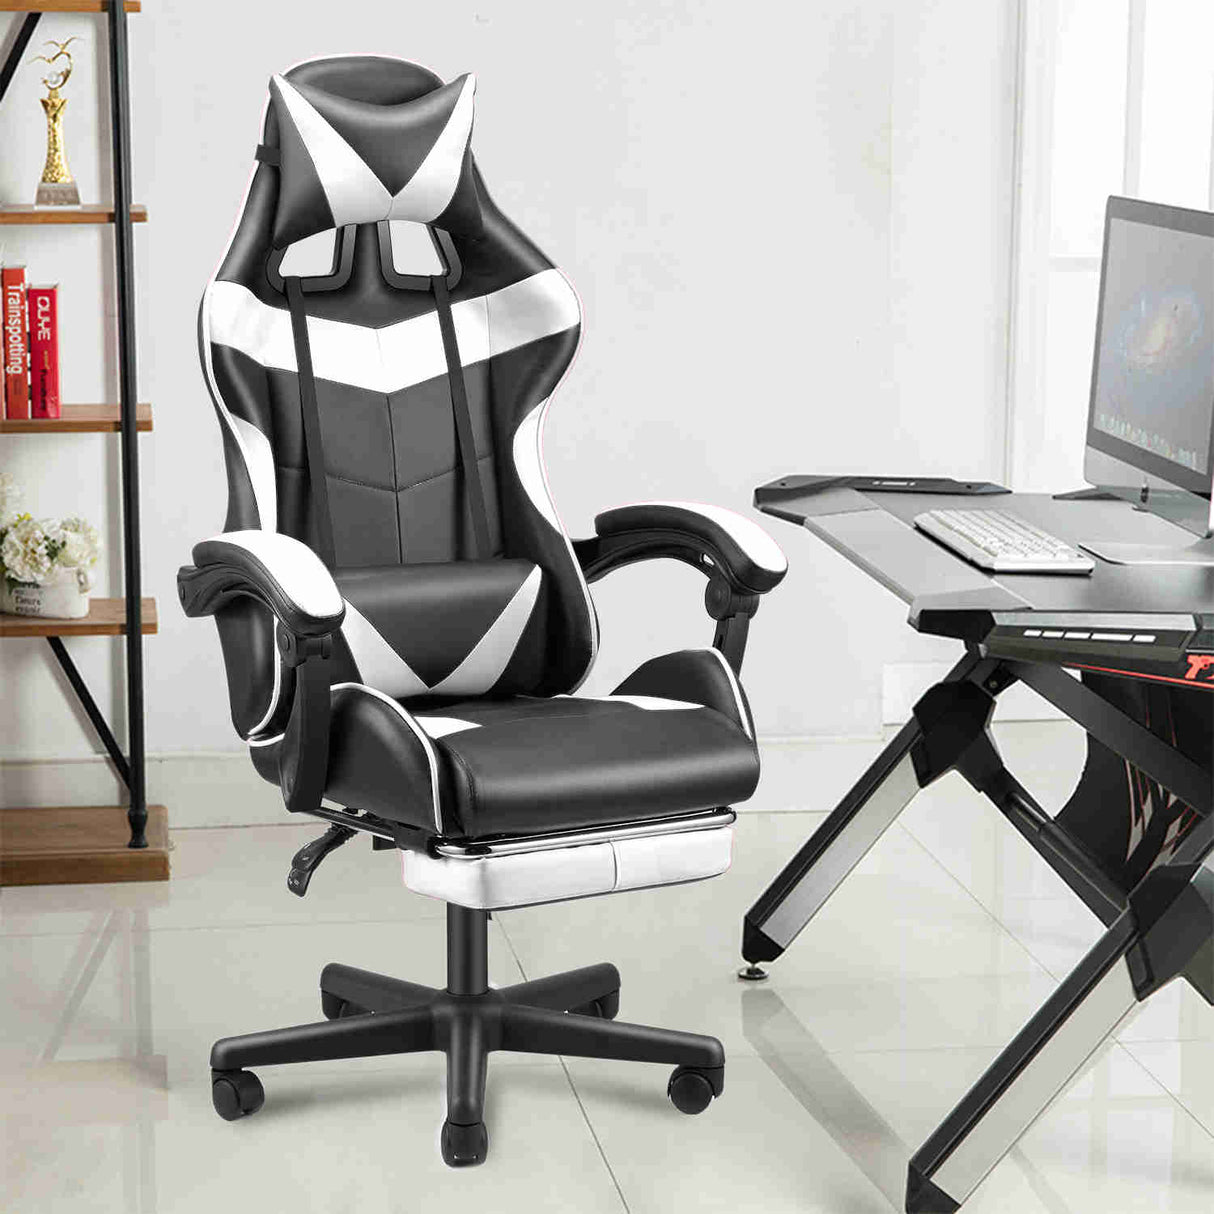 Black Bull Gaming Chair with Foot rest - White - Level UpBlack BullGaming Chair4044951074134